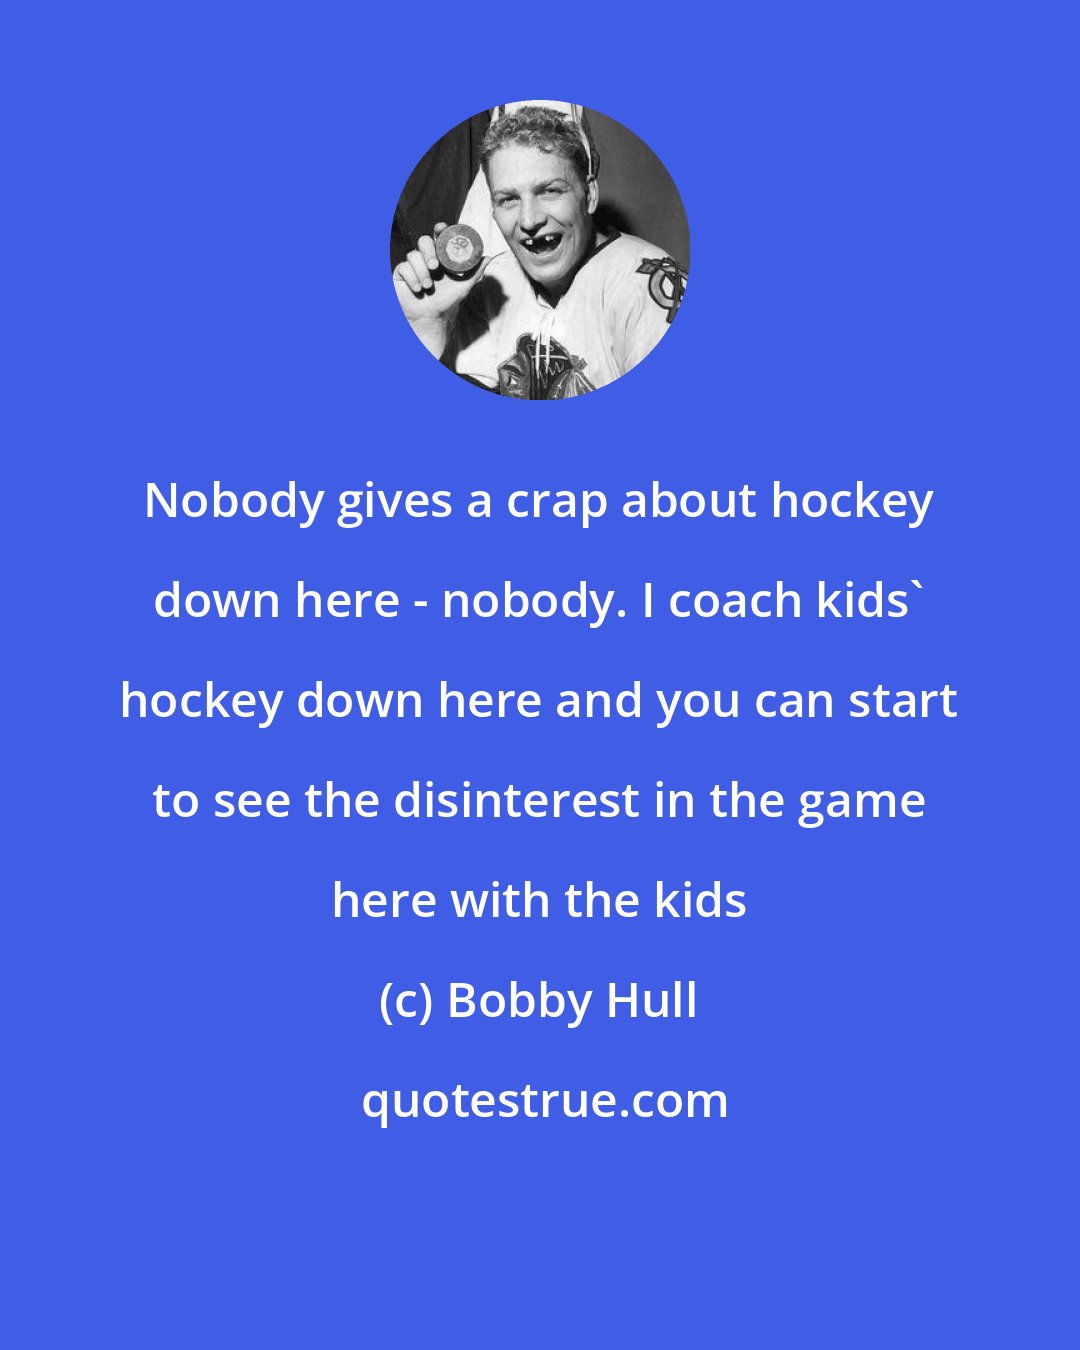 Bobby Hull: Nobody gives a crap about hockey down here - nobody. I coach kids' hockey down here and you can start to see the disinterest in the game here with the kids